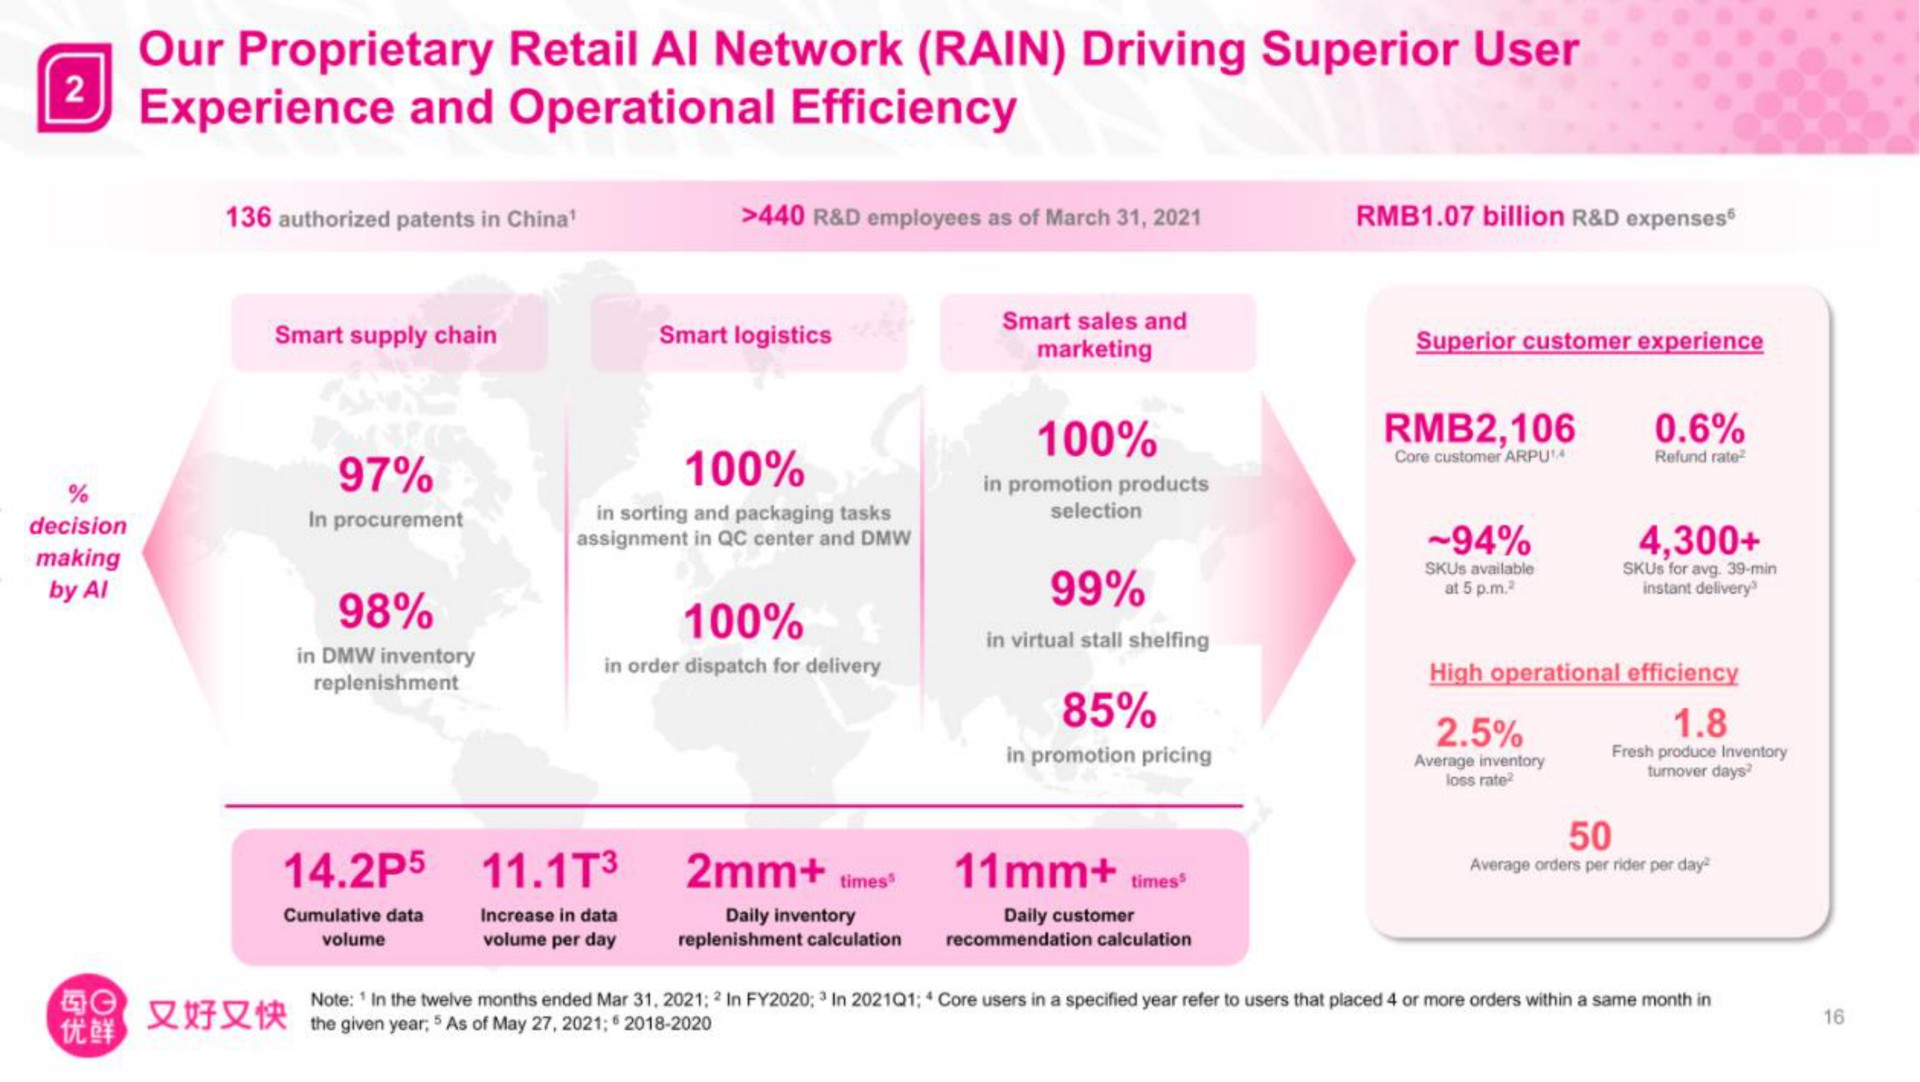 our proprietary retail network rain driving superior user experience and operational efficiency sinew he | Missfresh